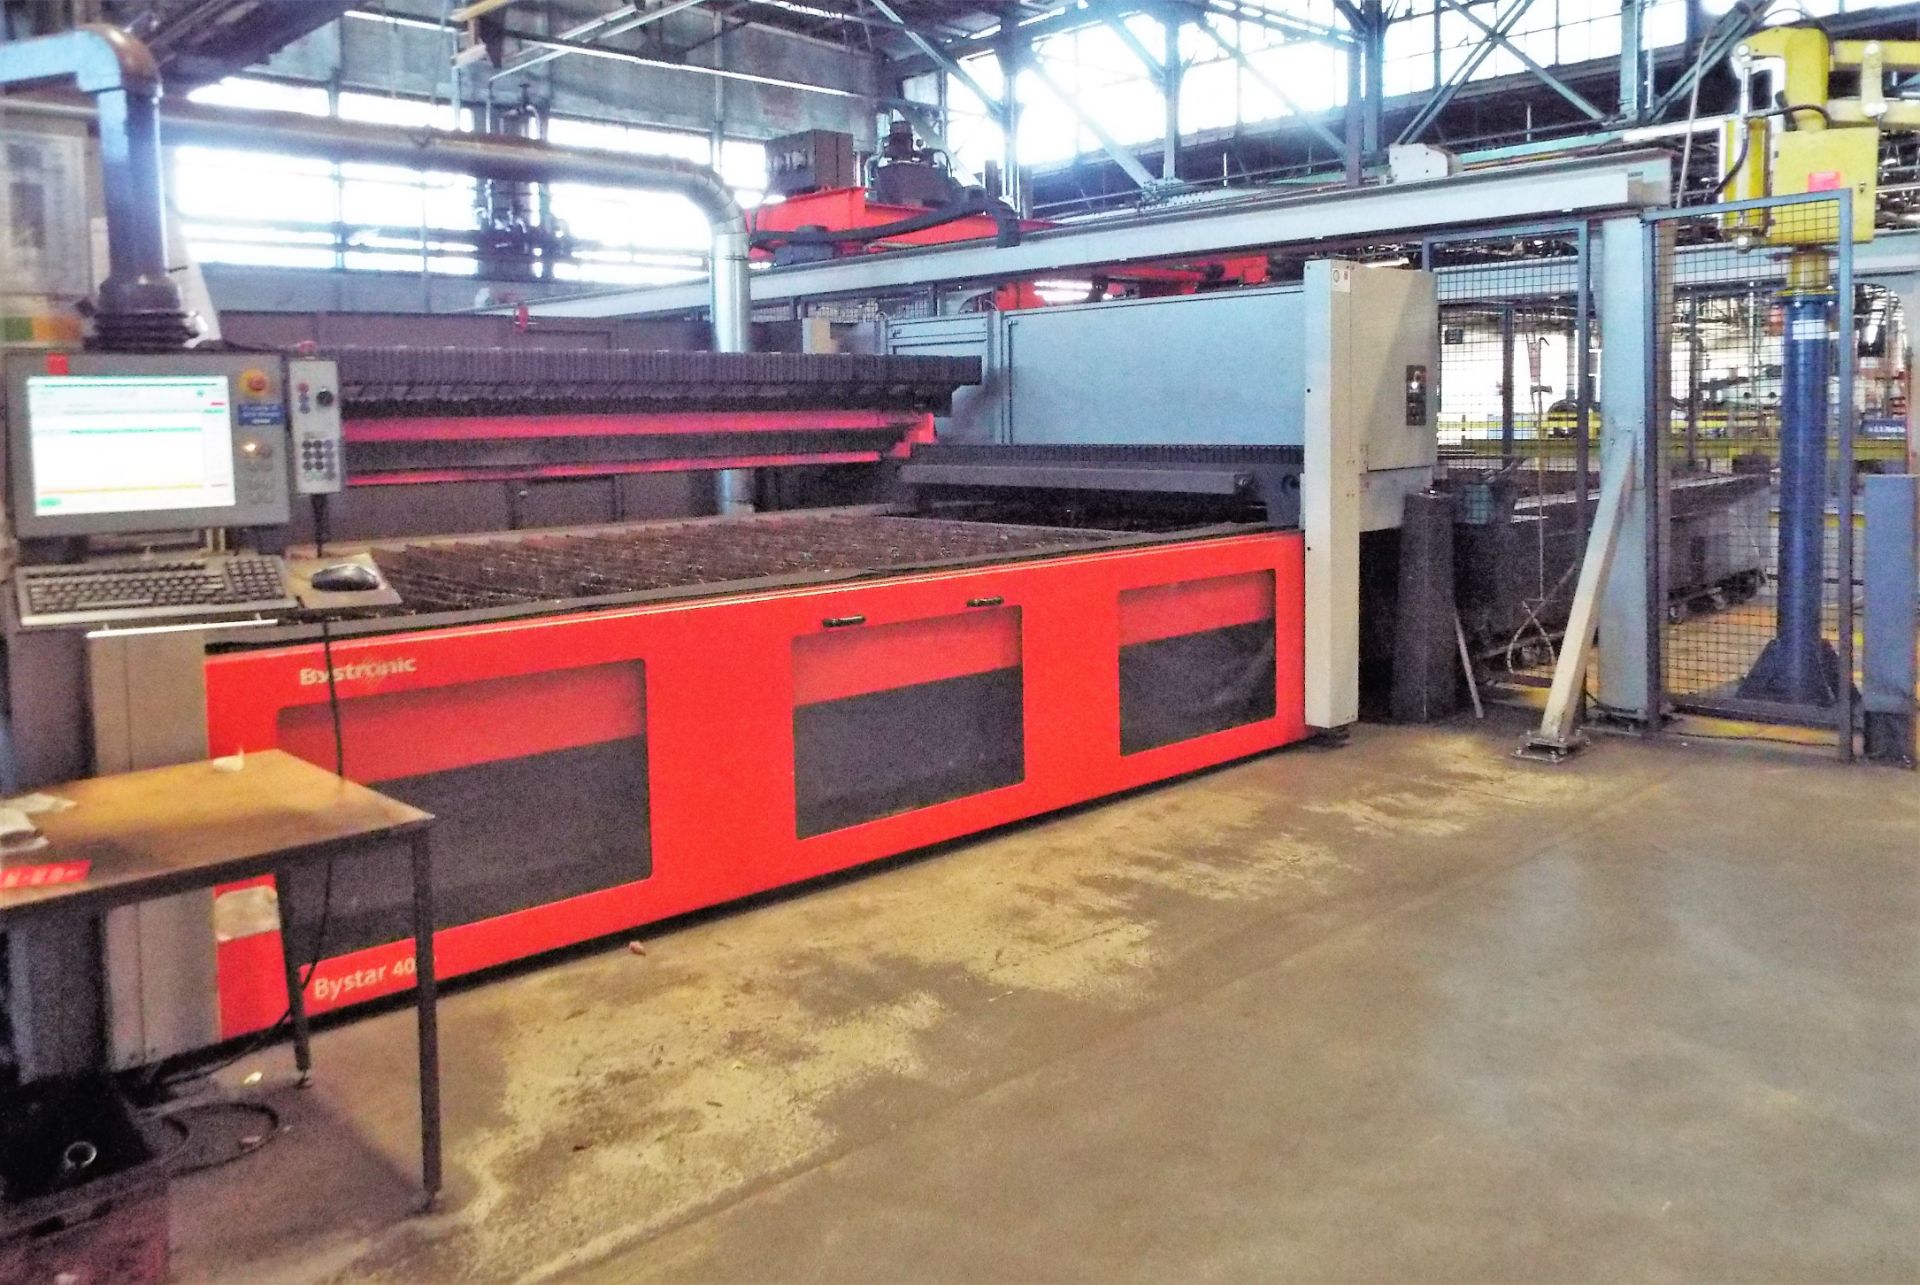 Bystronic 4020 Laser Cutting Cell